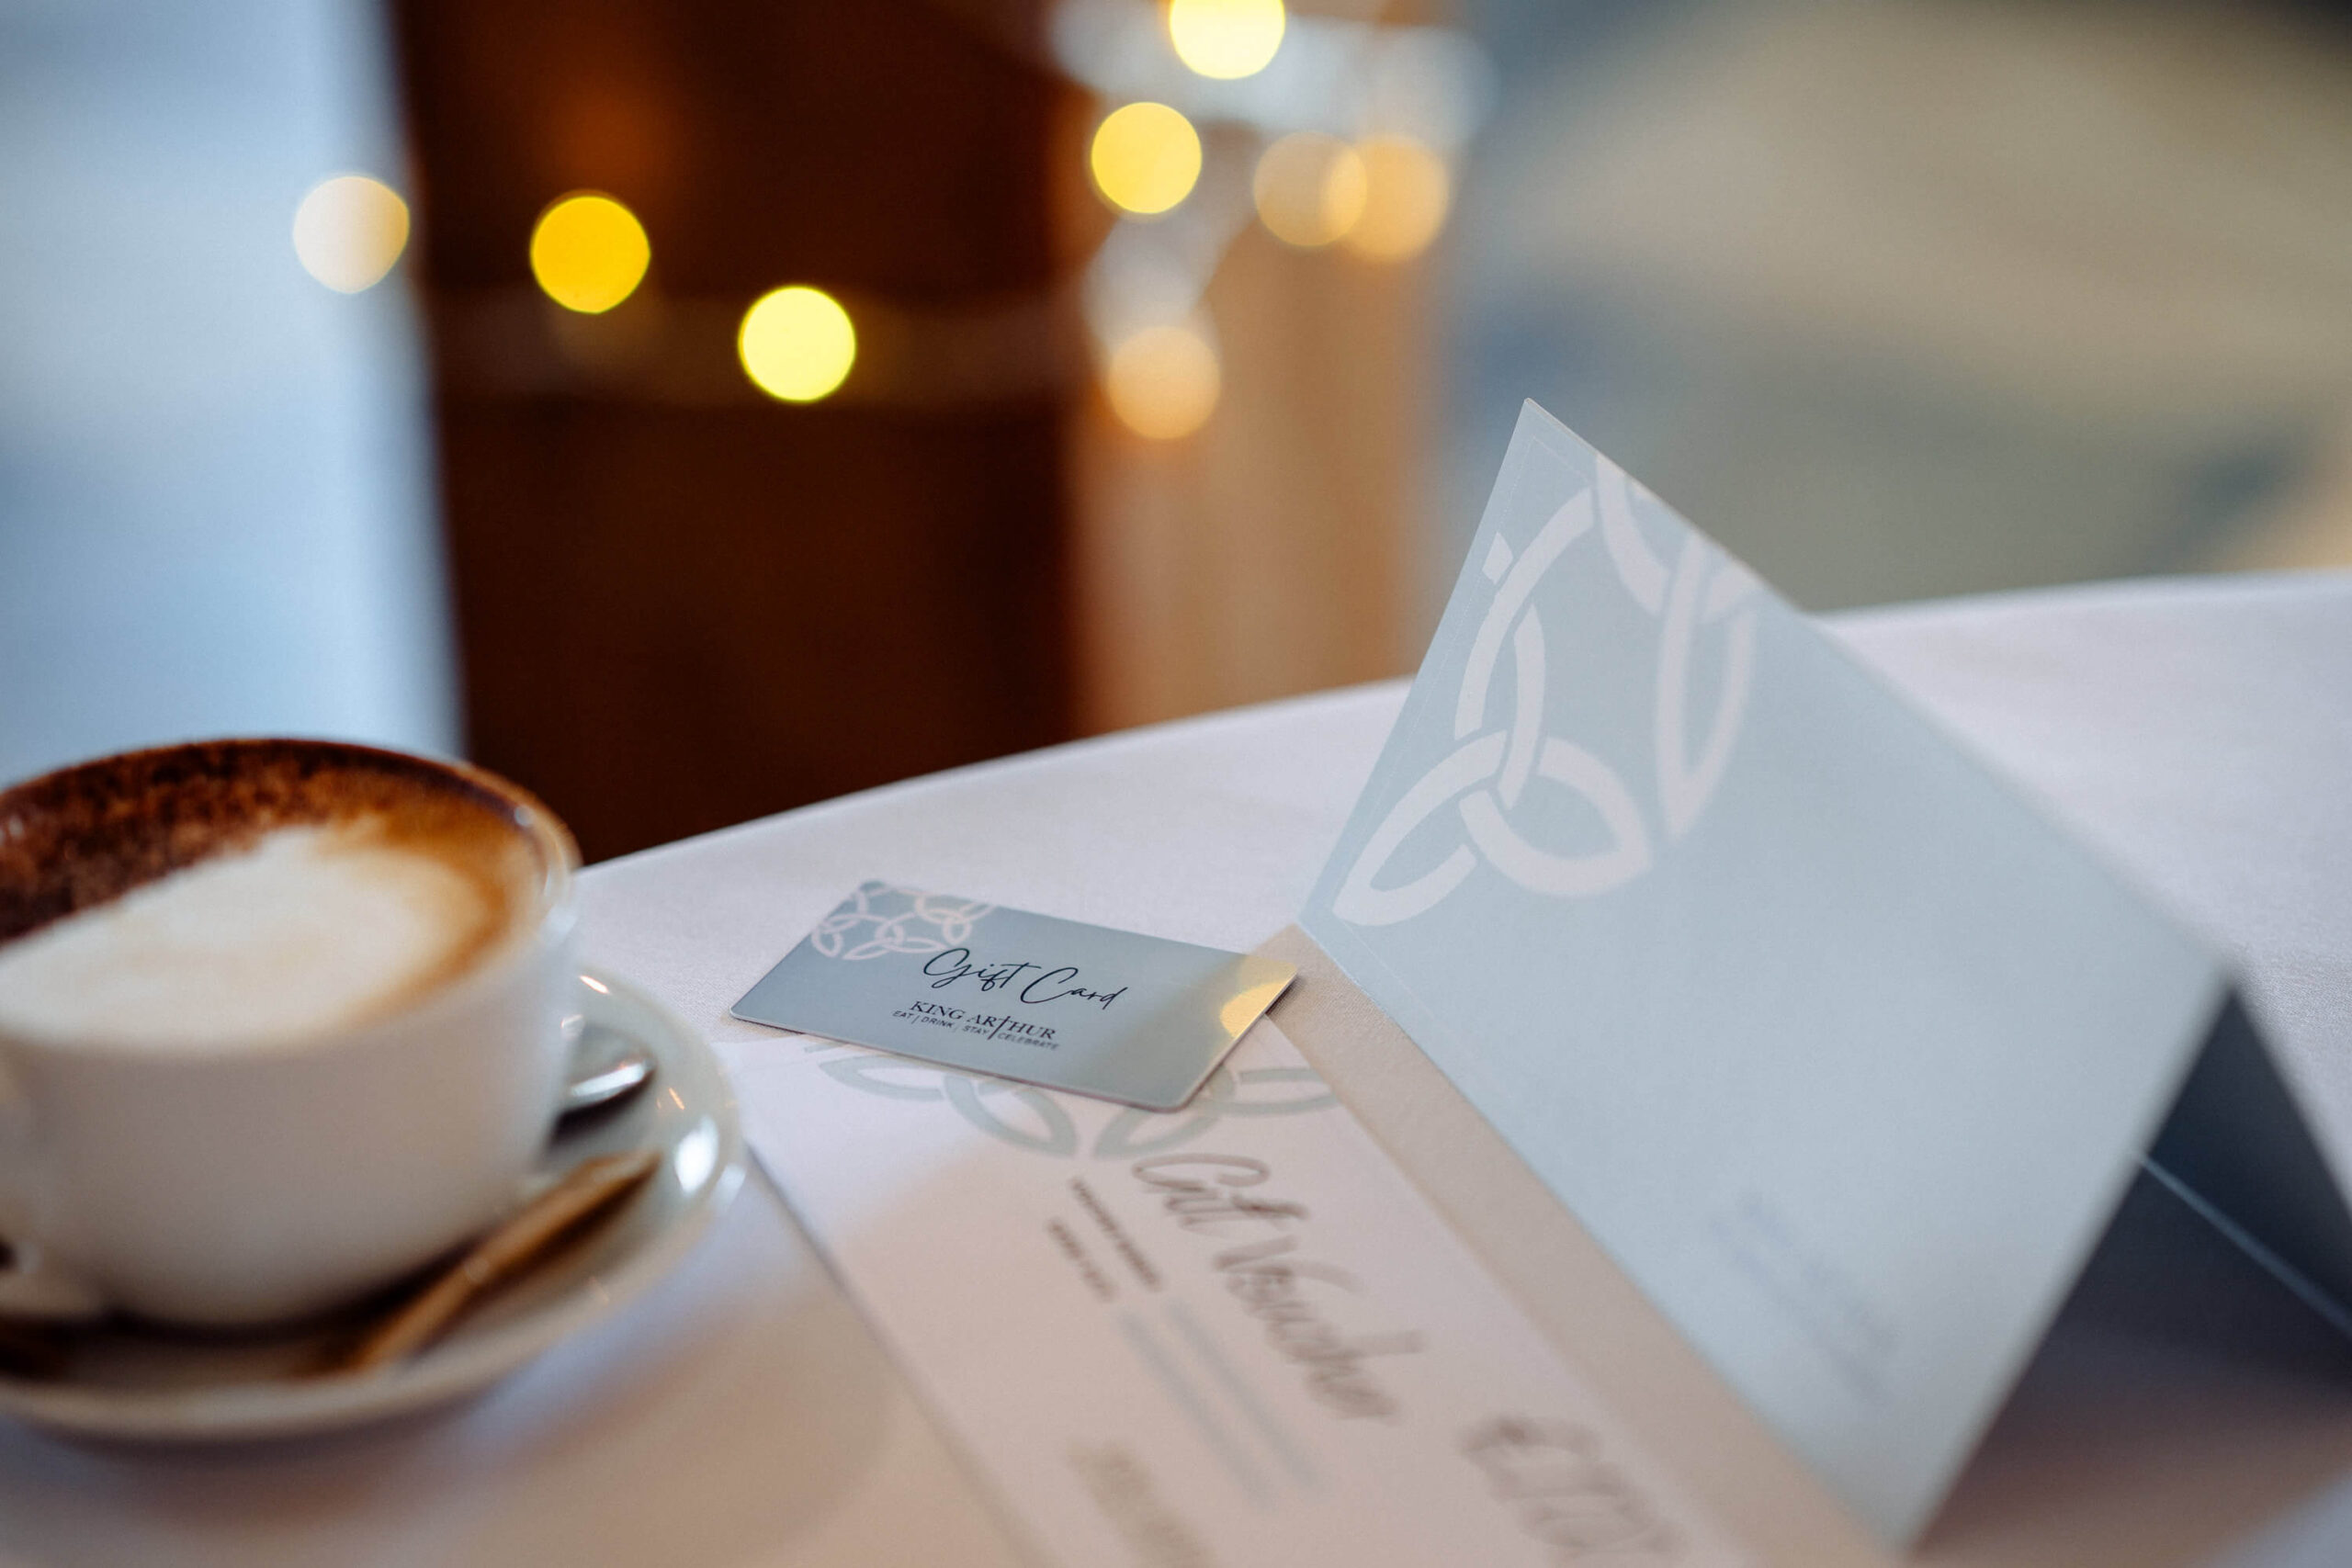 gift vouchers from swansea